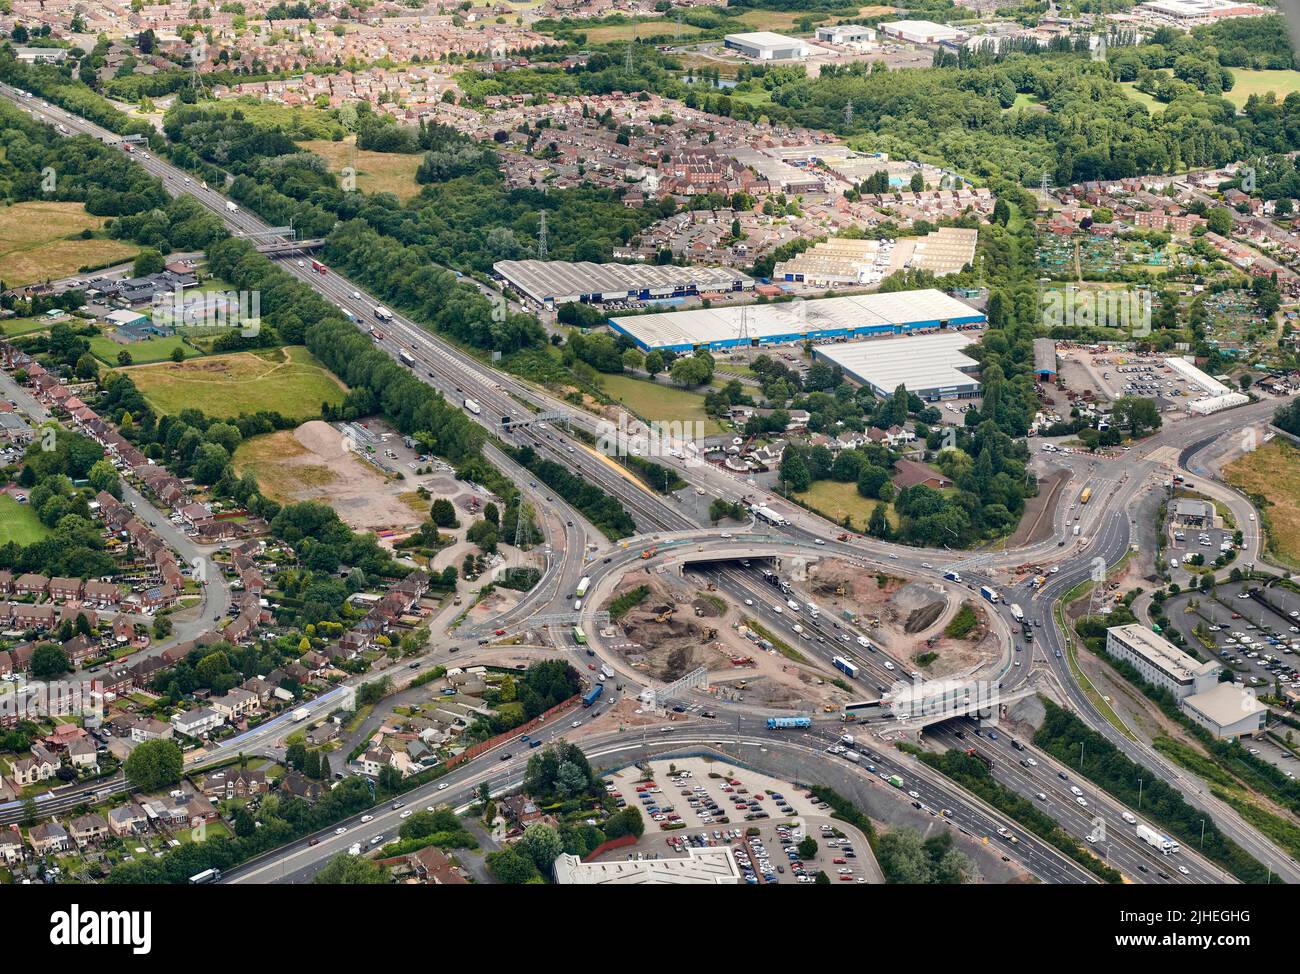 the rebuilding of Junction 10 on the M6 Motorway, shot from the air, connecting The Back Country Route and Walsall, West Midlands, UK Stock Photo